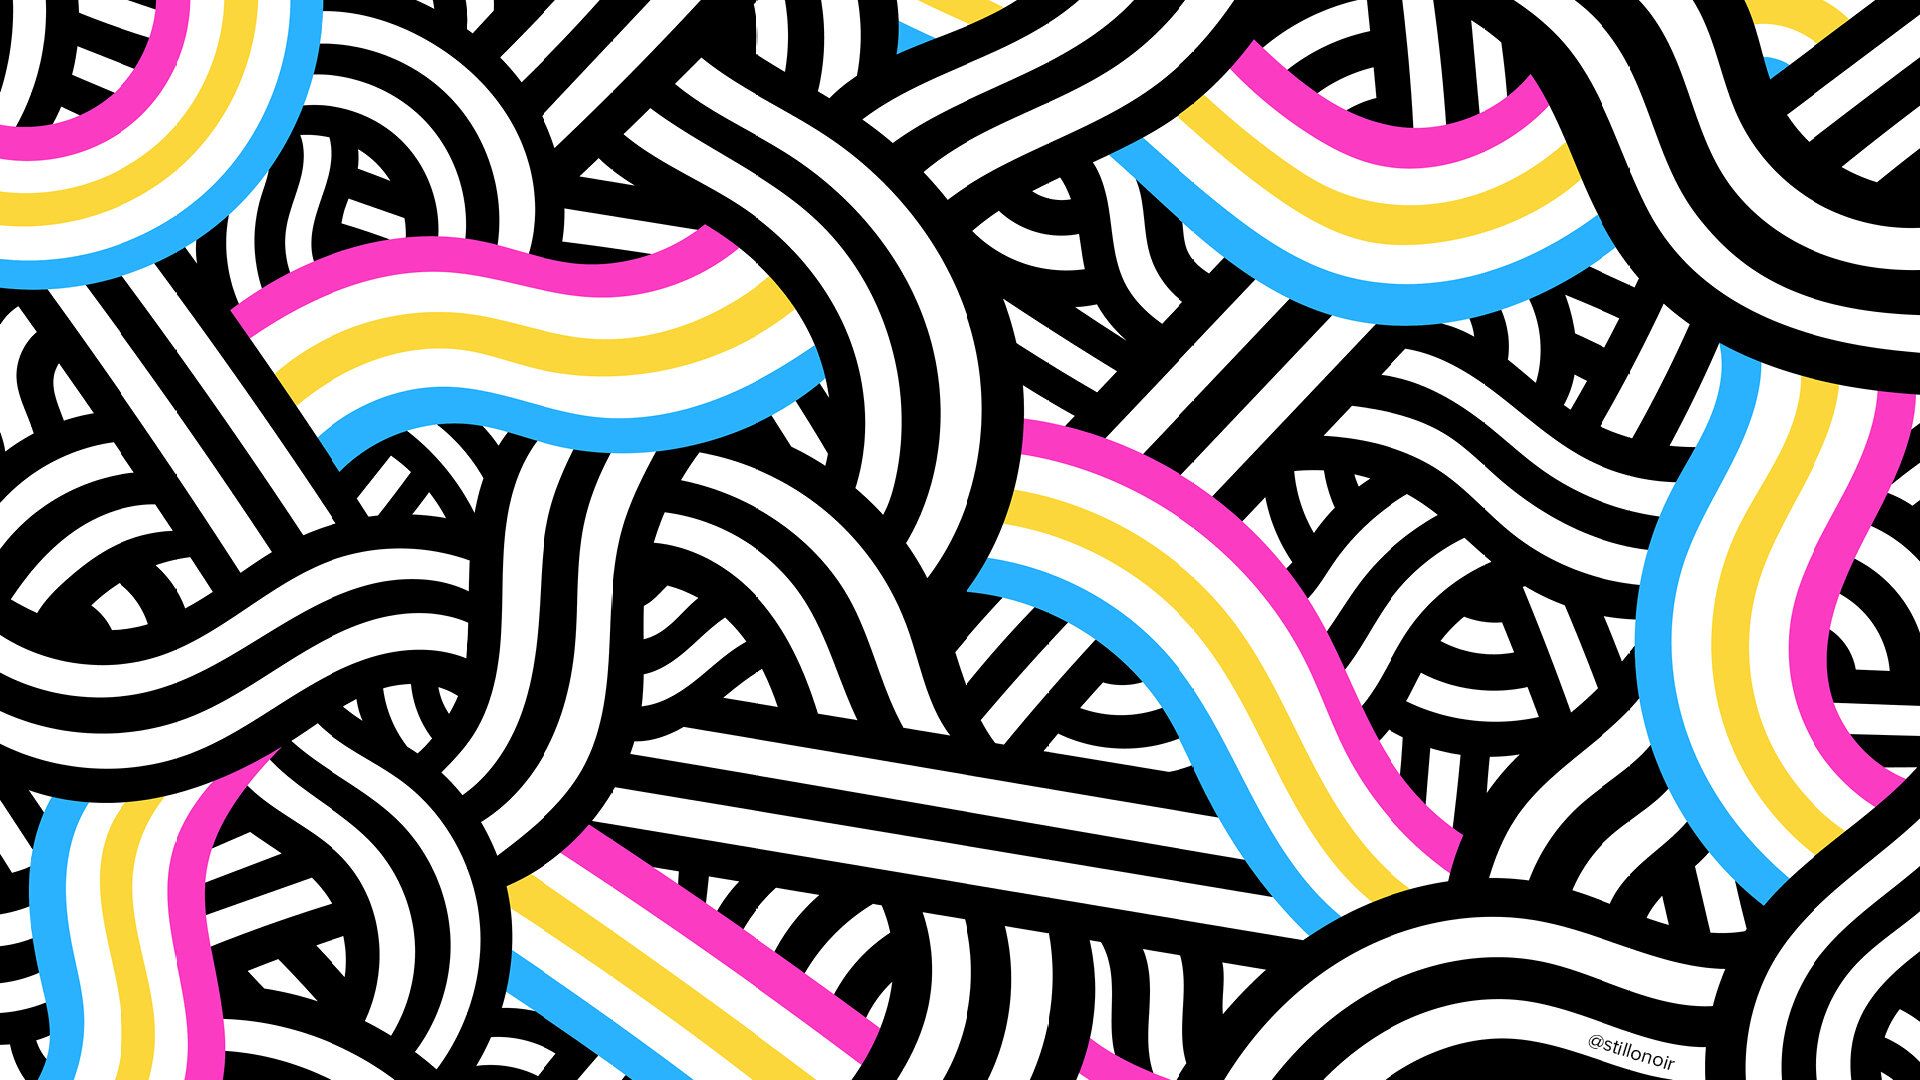 A black and white pattern with colorful lines - Pansexual, non binary